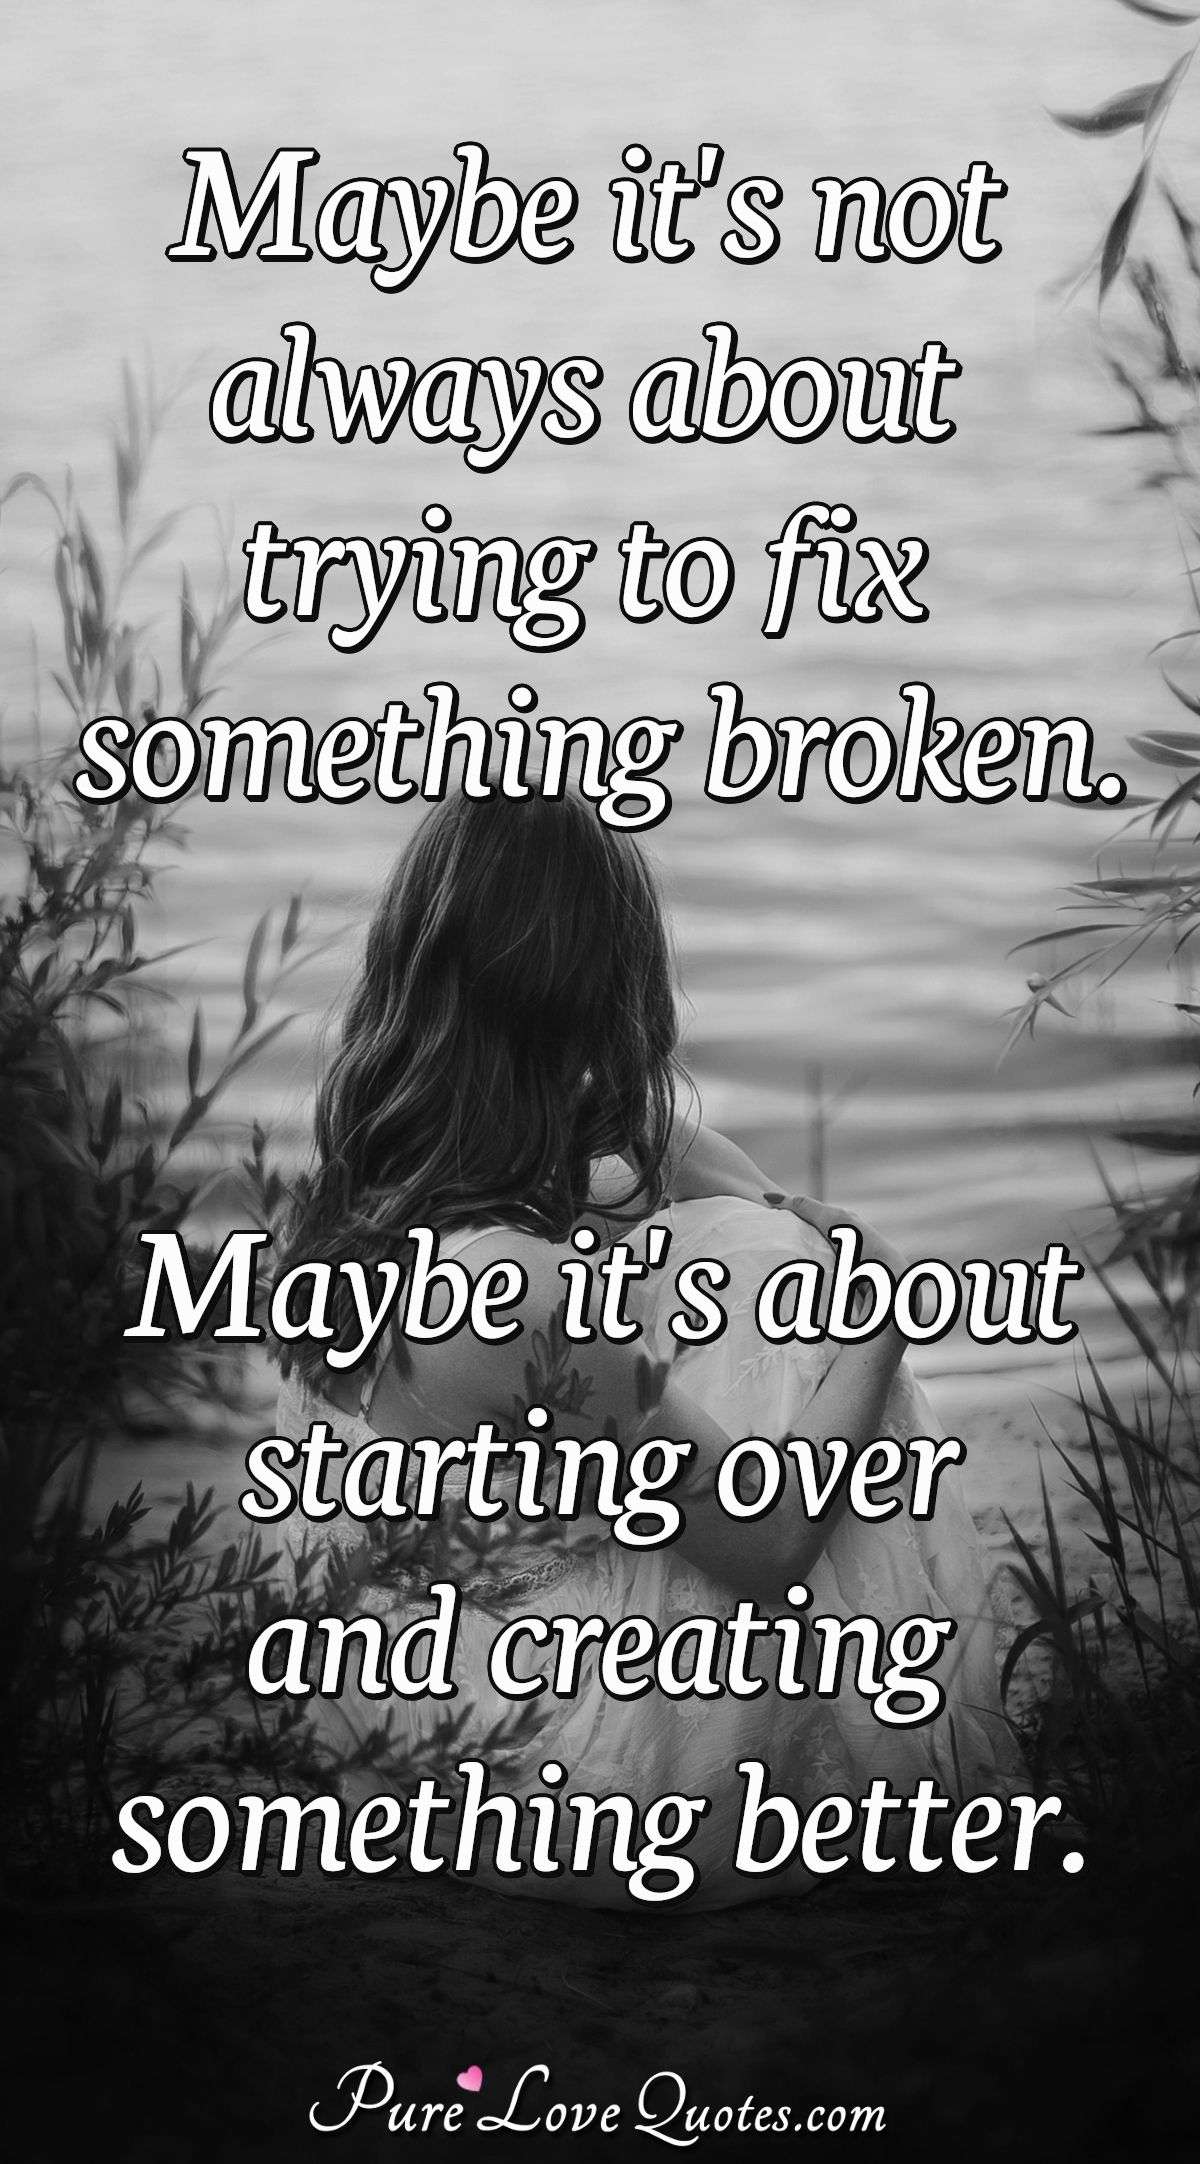 Maybe it's not always about trying to fix something broken. Maybe it's about starting over and creating something better. - Anonymous